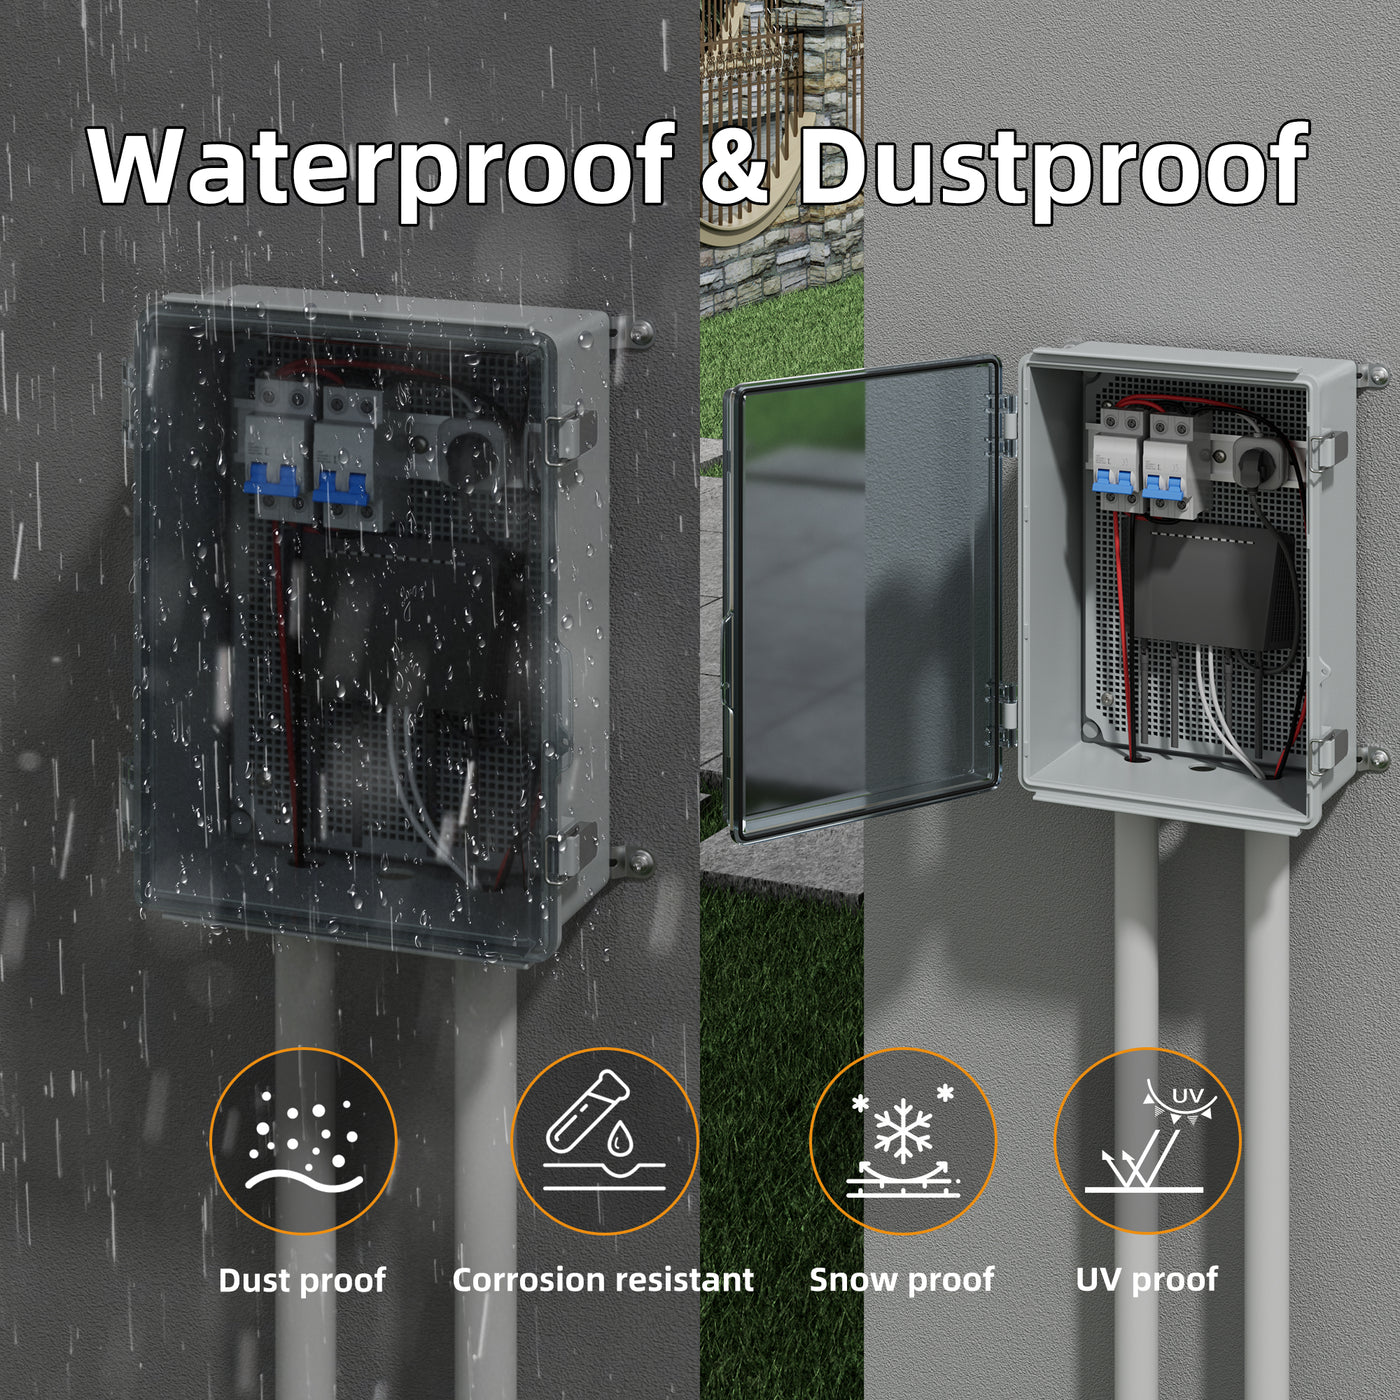 Outside IP67 Waterproof Electrical Enclosure Box with Hinged Cover - 13.8"x9.8"x5.9" - DAIER